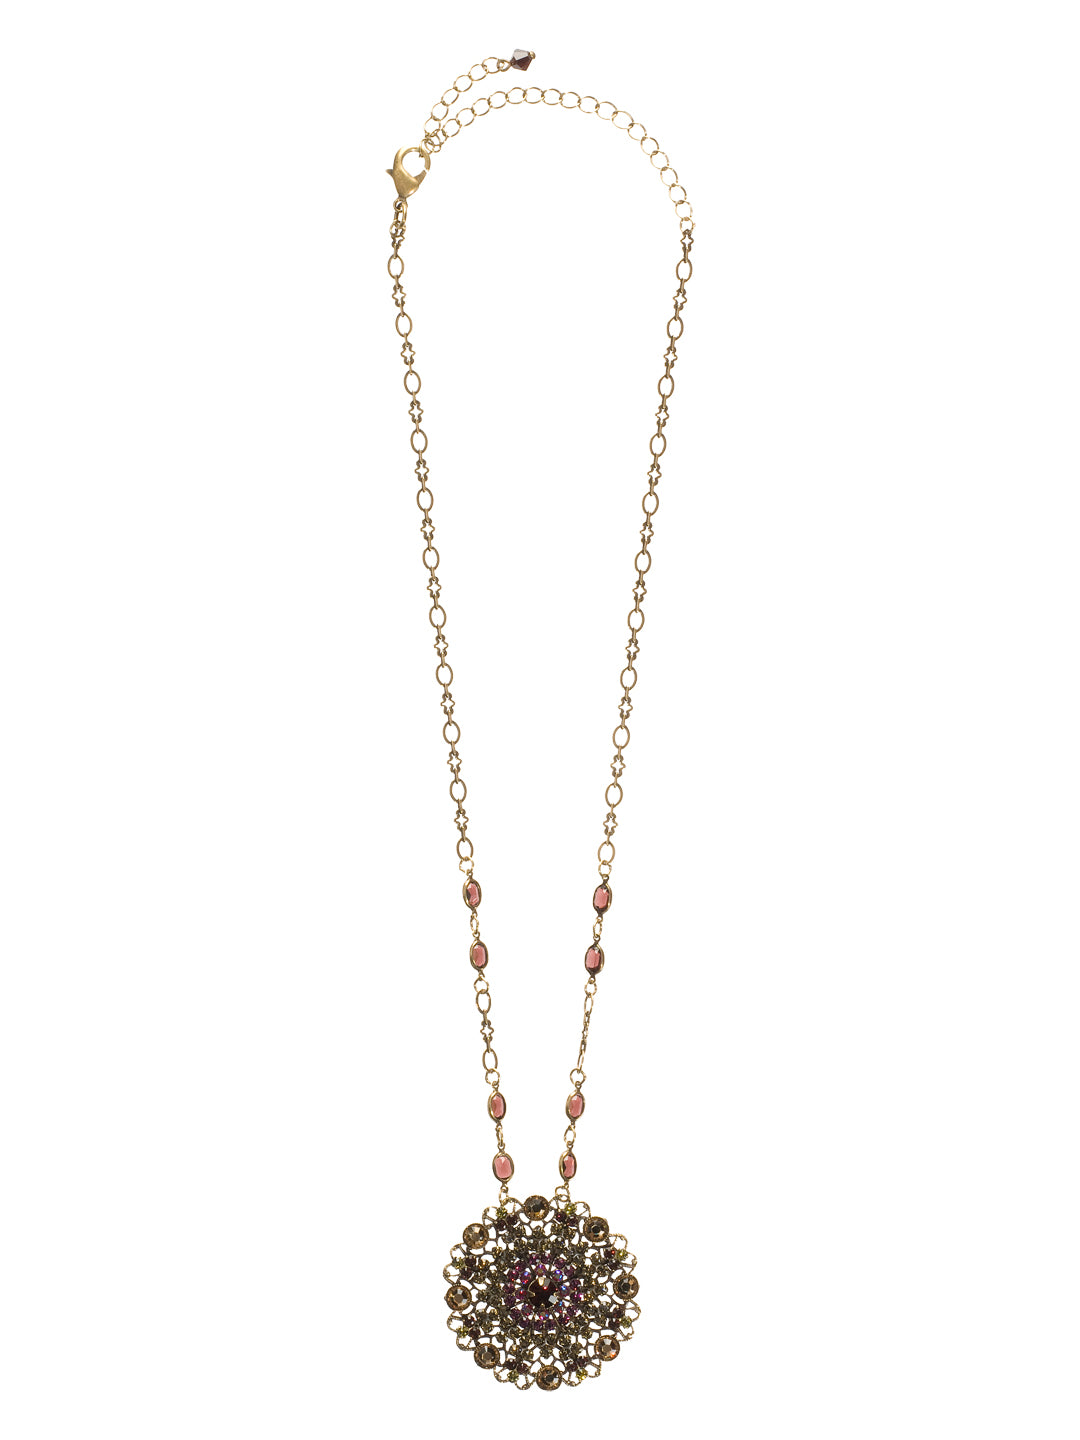 Mystical Filigree Pendant Necklace - NBP35AGTAP - The Mystical Filigree Pendant necklace is a beautiful statement piece; intricate metalwork and sparkling crystals create a timeless piece that can be worn for decades. From Sorrelli's Tapestry collection in our Antique Gold-tone finish.